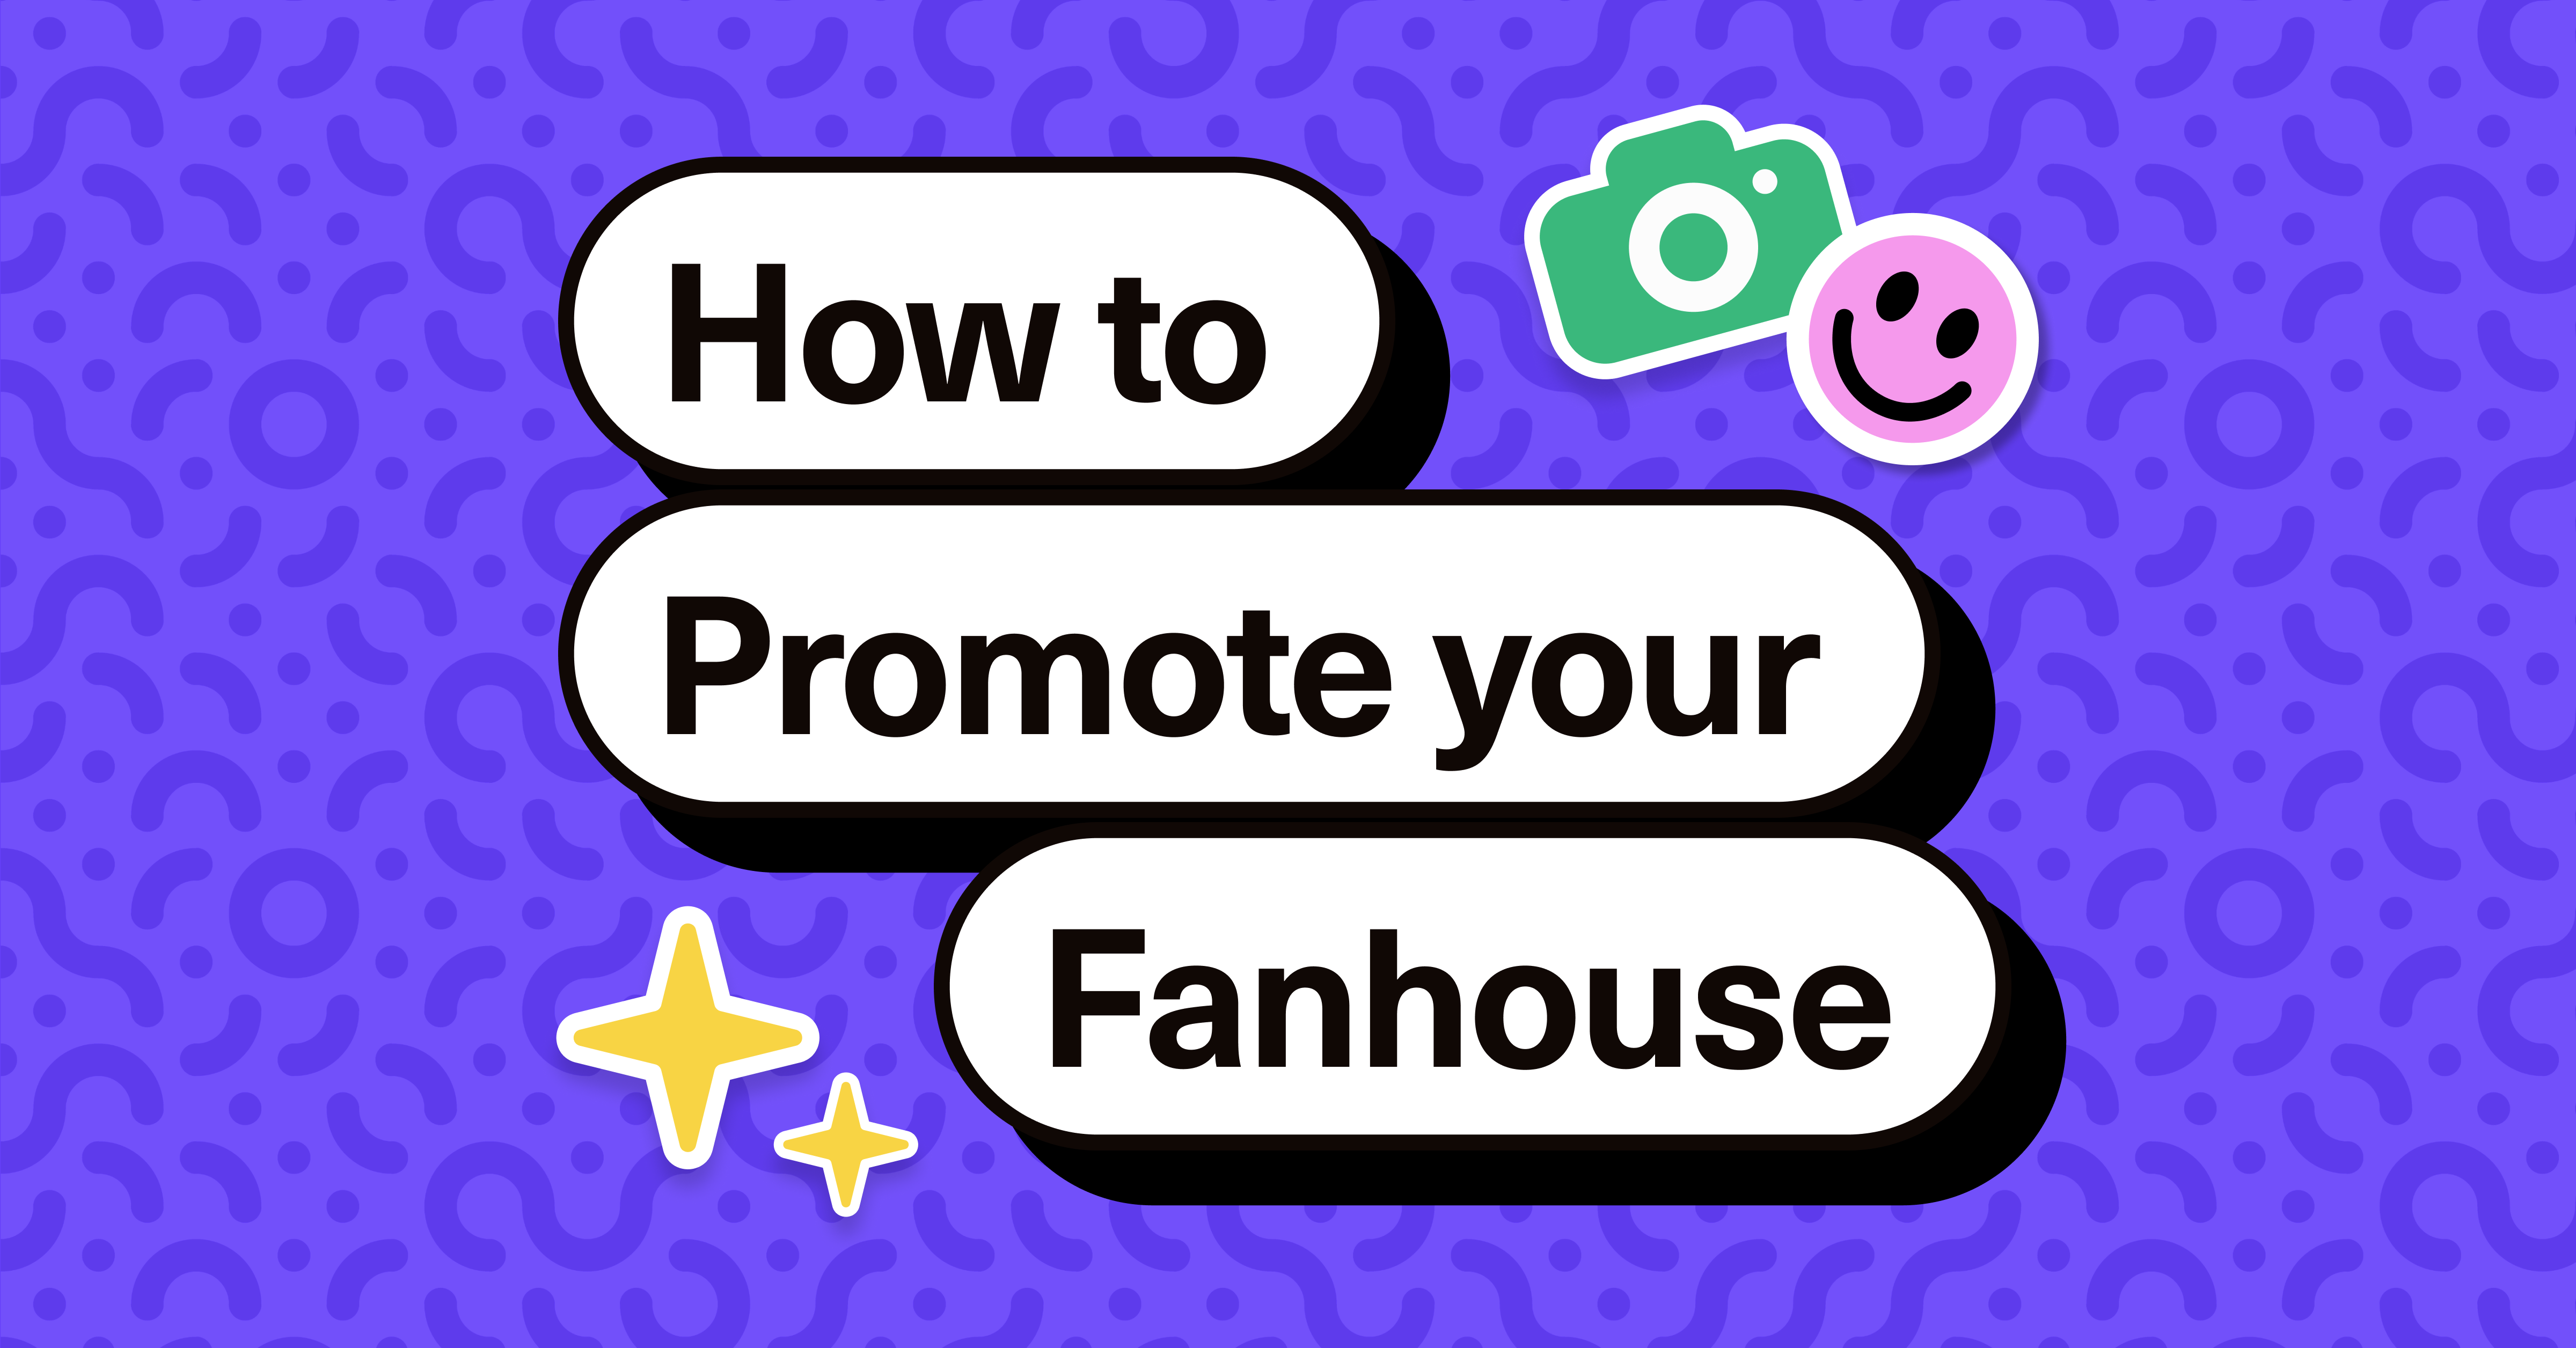 How to promote your Fanhouse